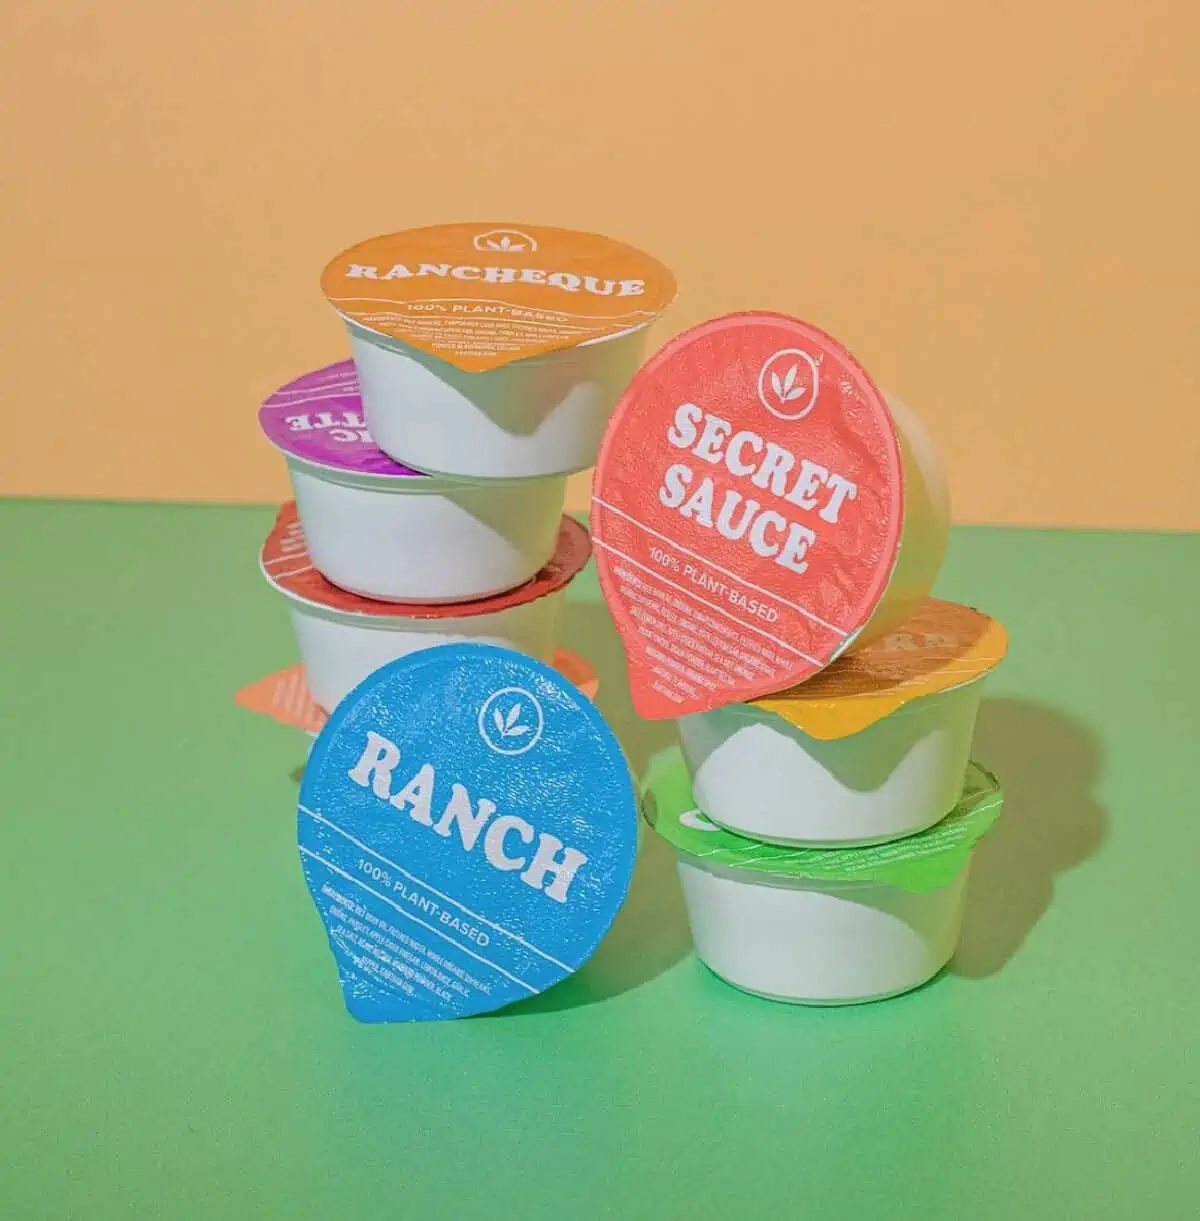 A stack of eight colorful circular plant-based dips and dressings on a green tabletop with an orange background.